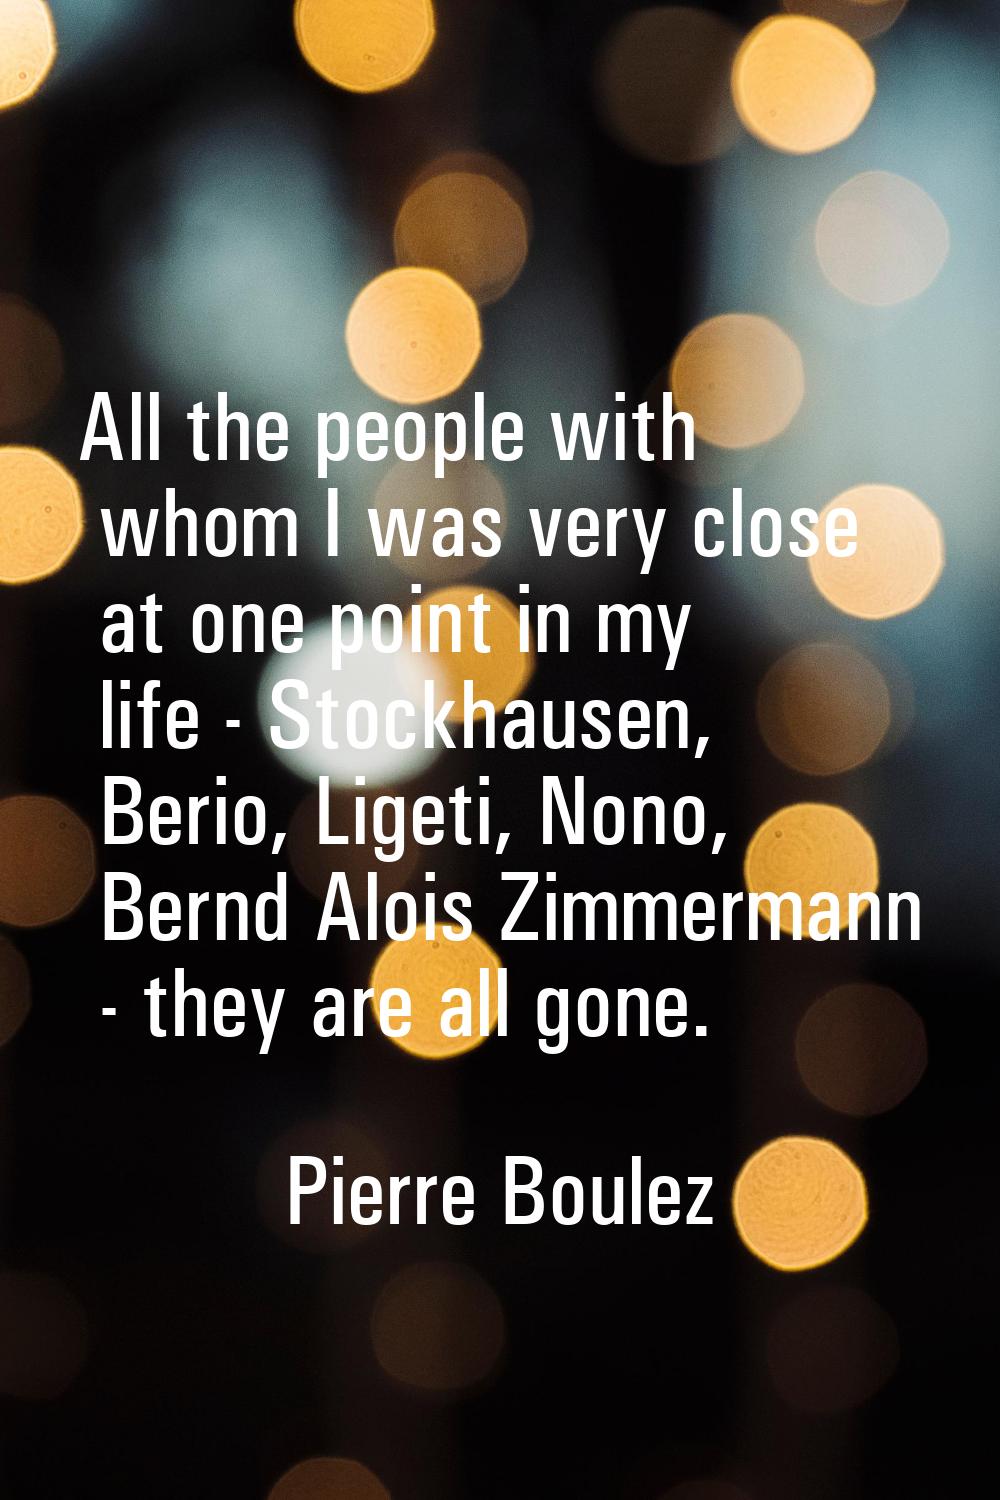 All the people with whom I was very close at one point in my life - Stockhausen, Berio, Ligeti, Non